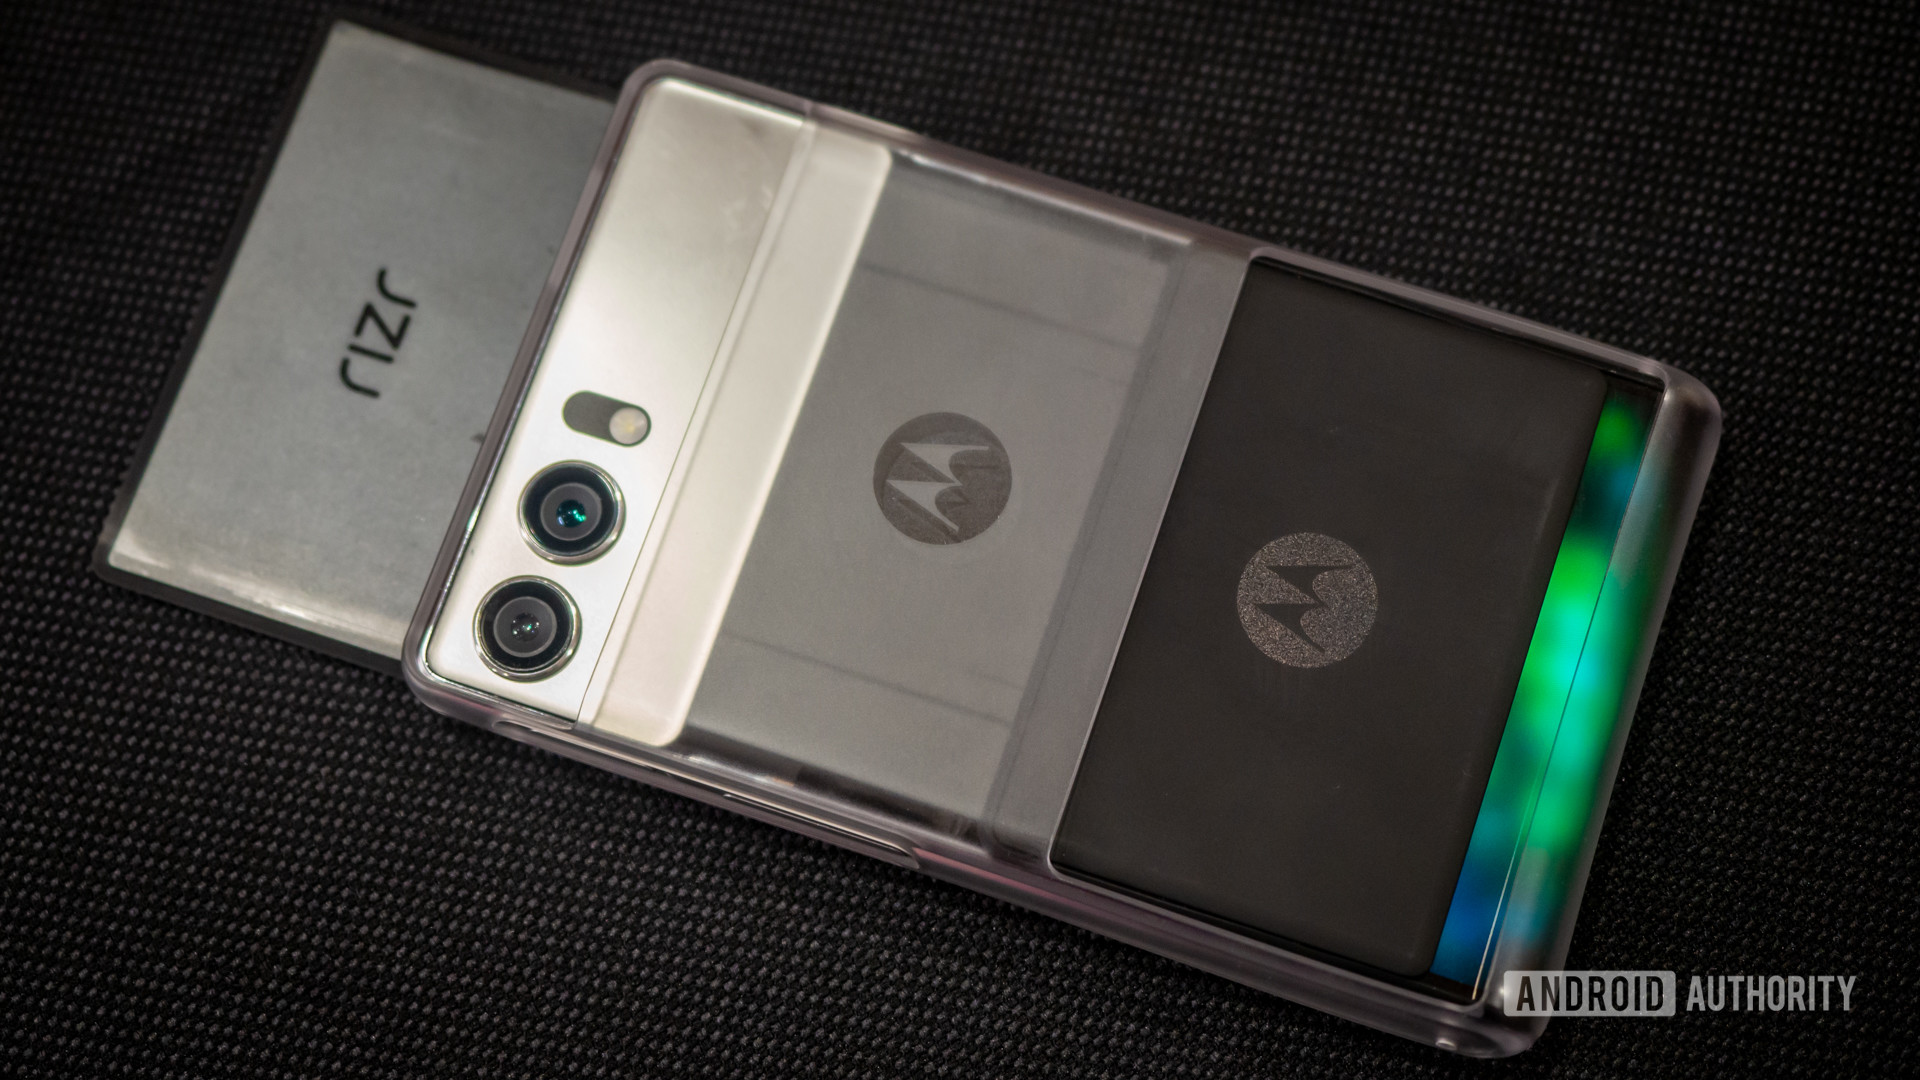 The Motorola Rizr roll-back phone has been expanded